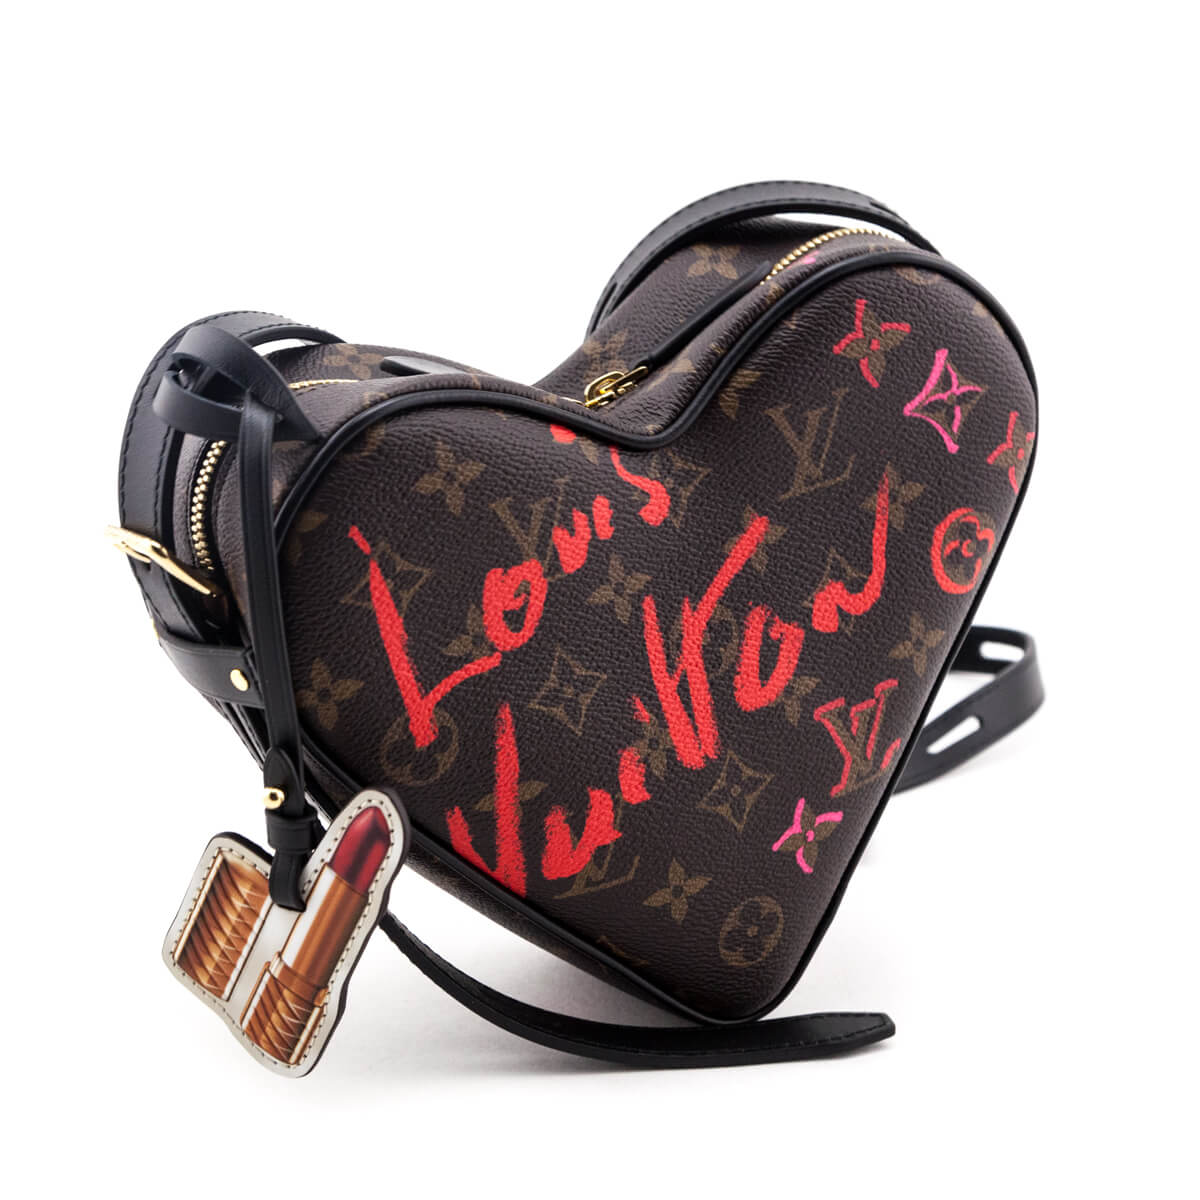 Exclusivity and Rare Louis Vuitton Coeur Fall in Love shoulder